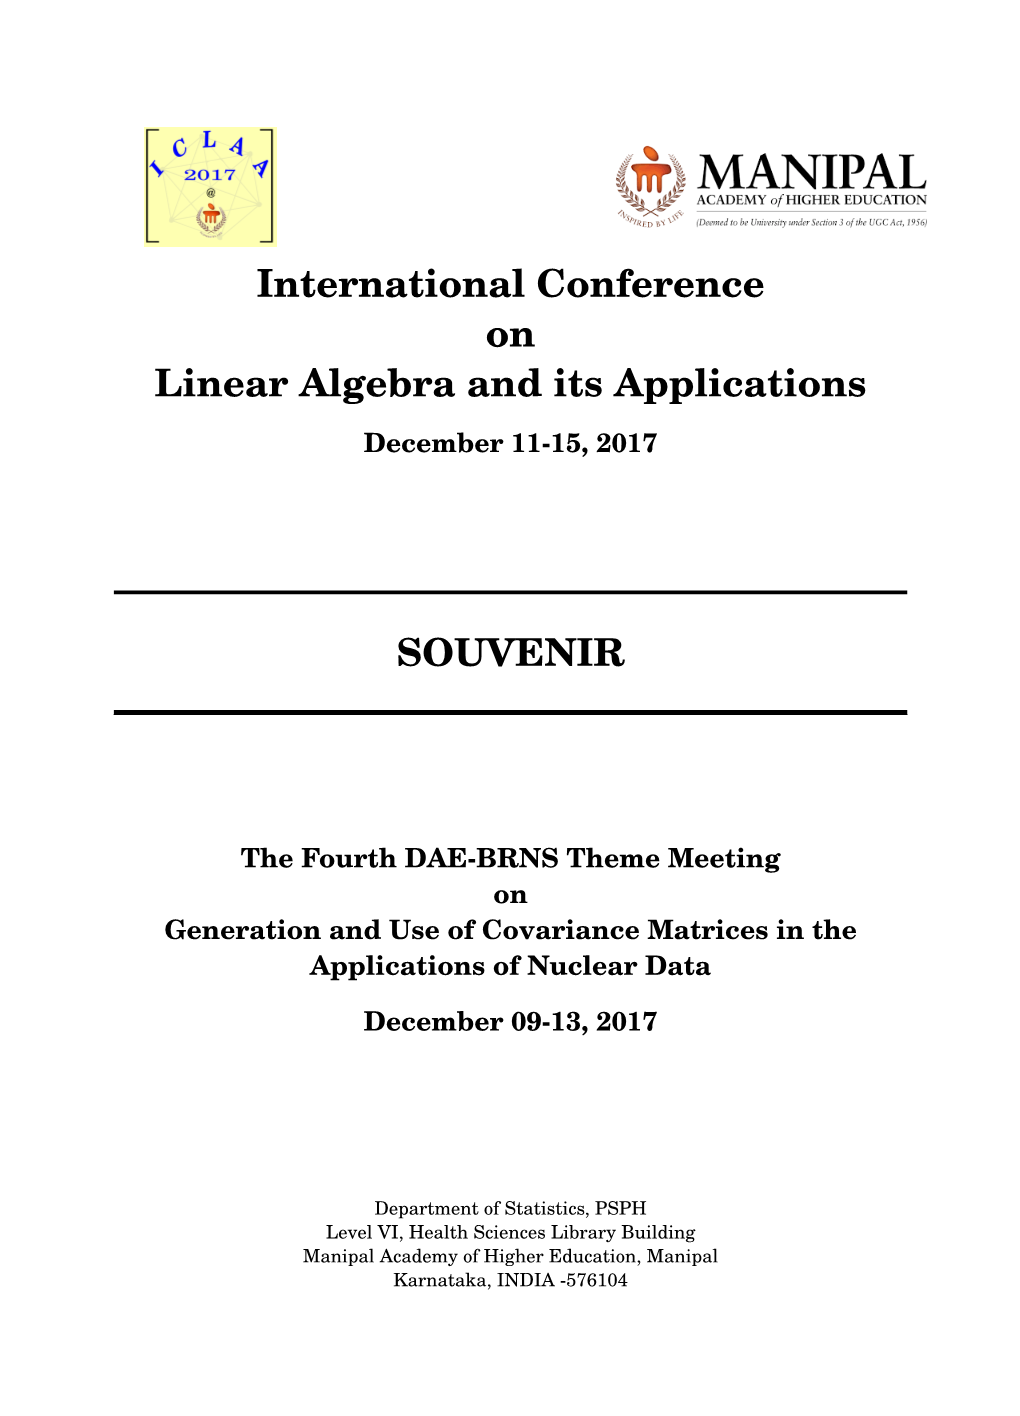 International Conference on Linear Algebra and Its Applications